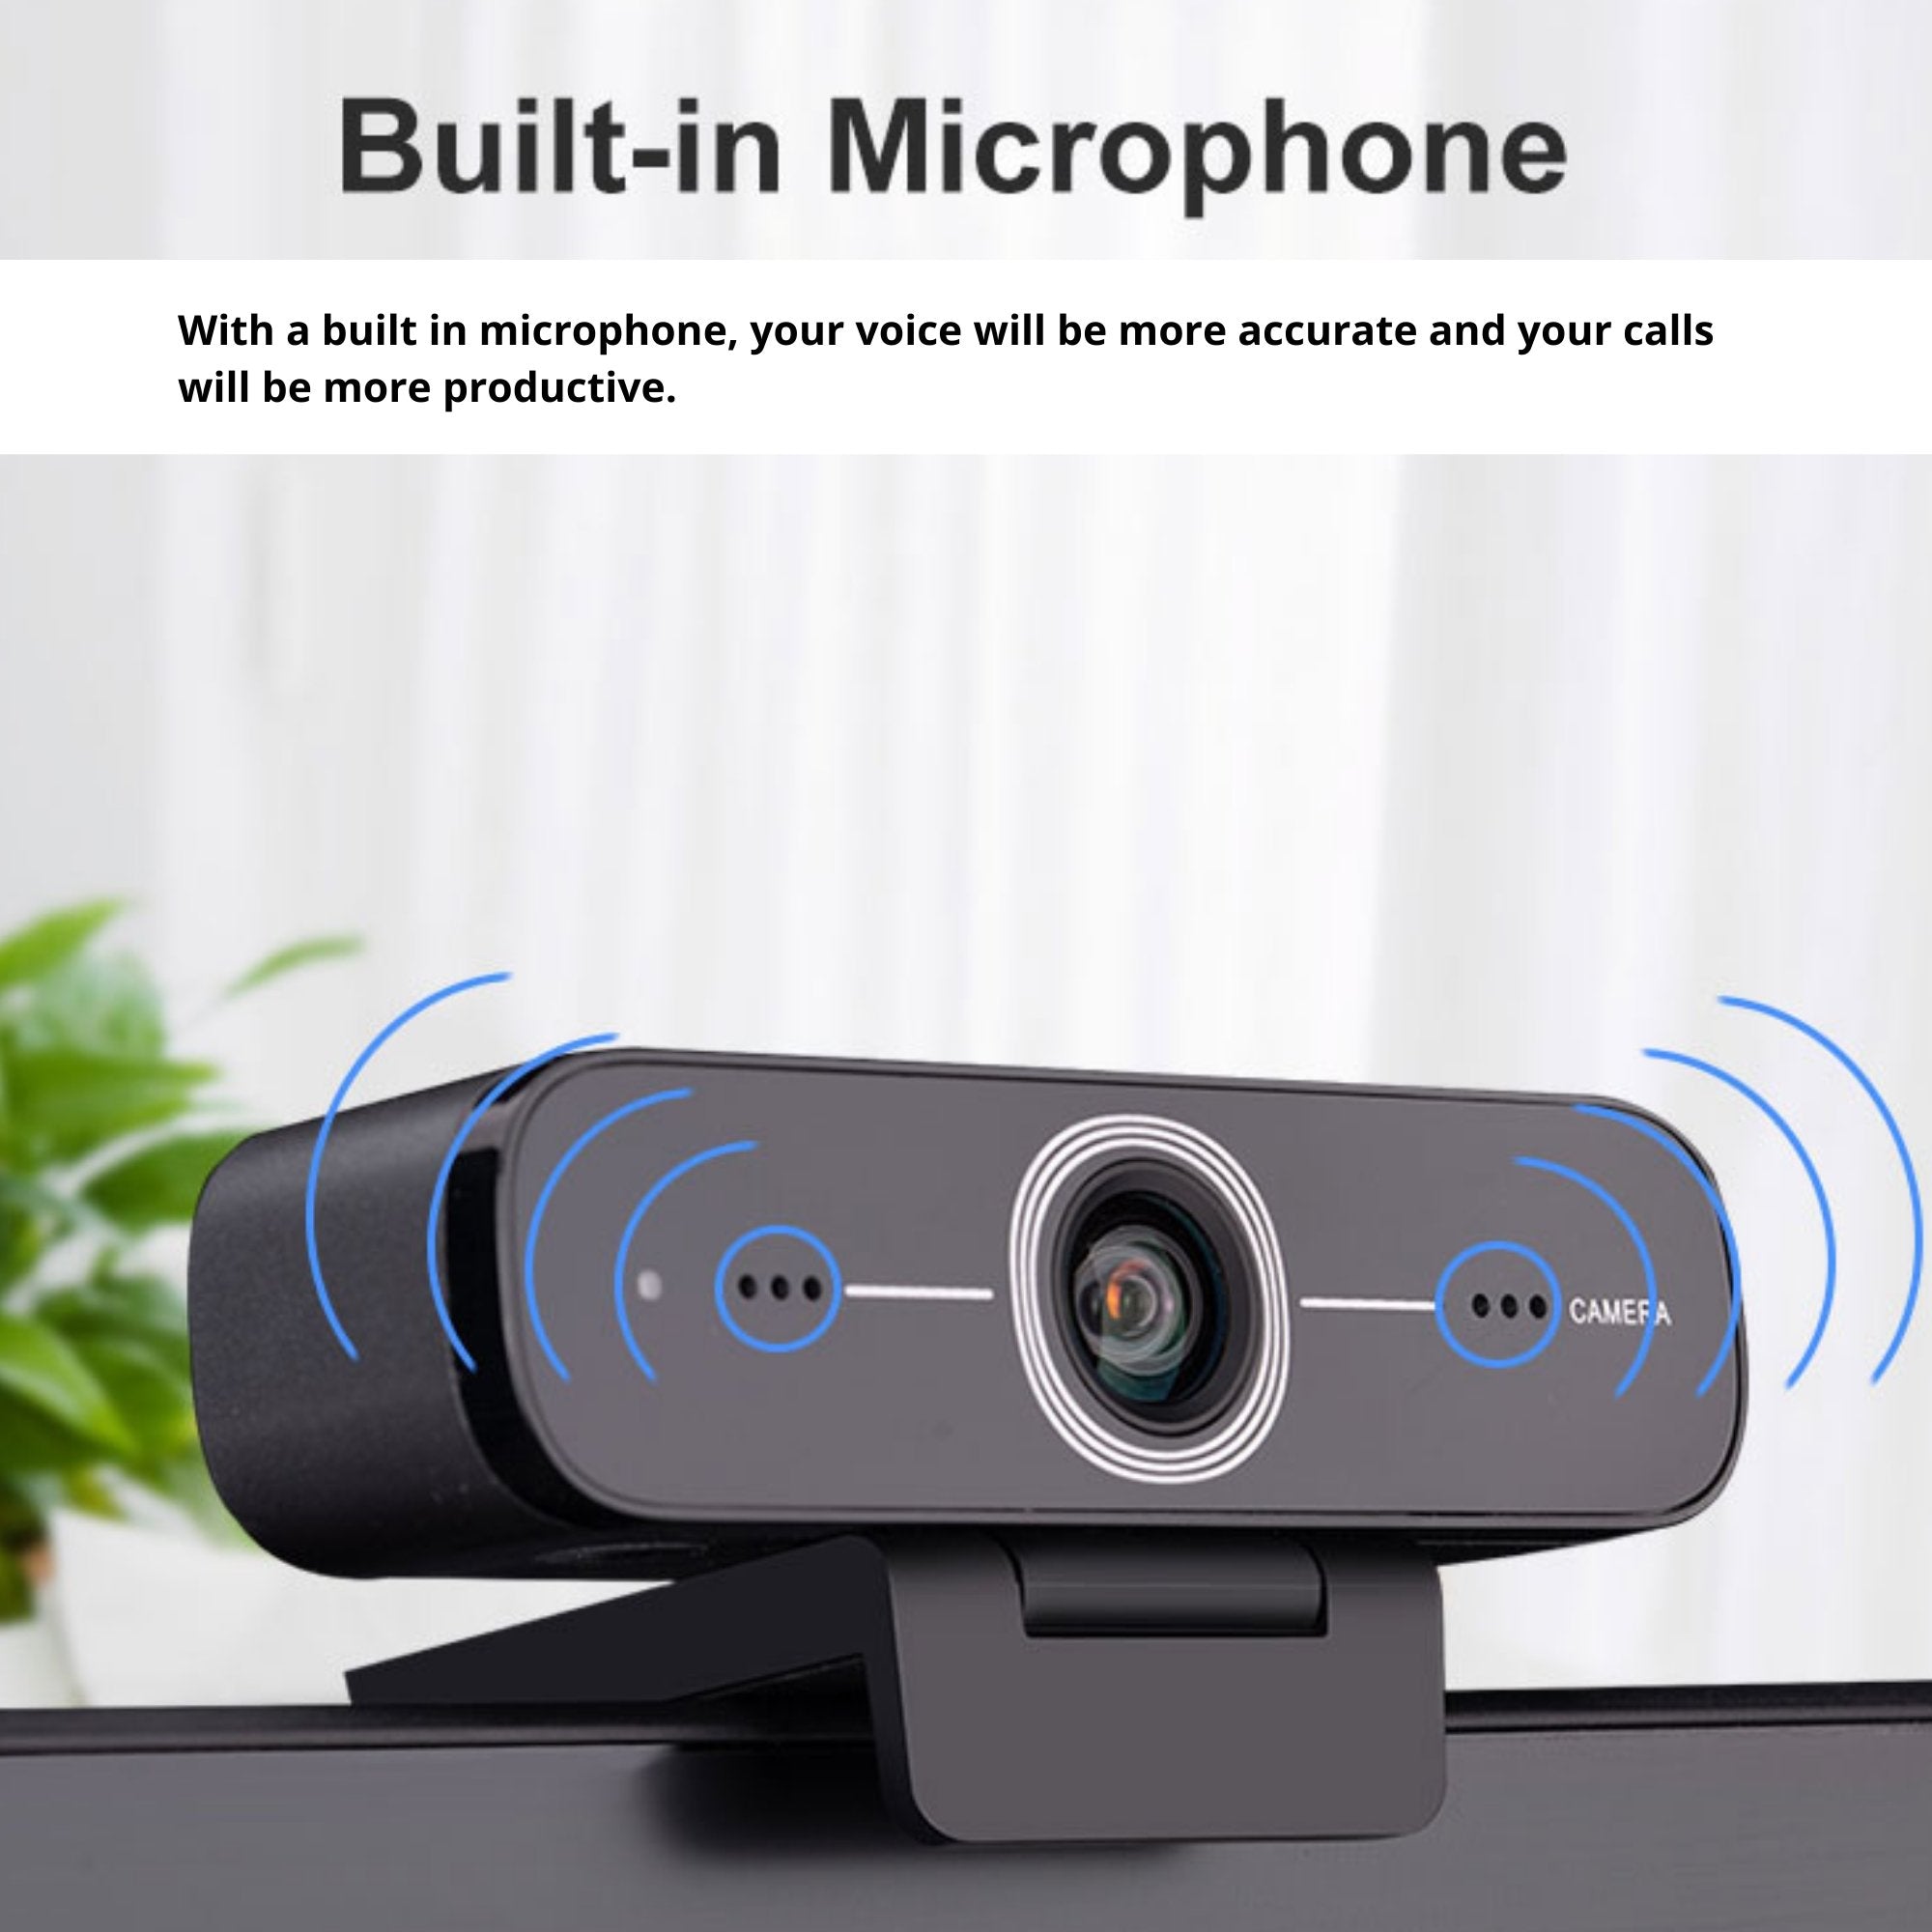 Discover HD100 Professional USB Webcam With 1080P - Headset Advisor